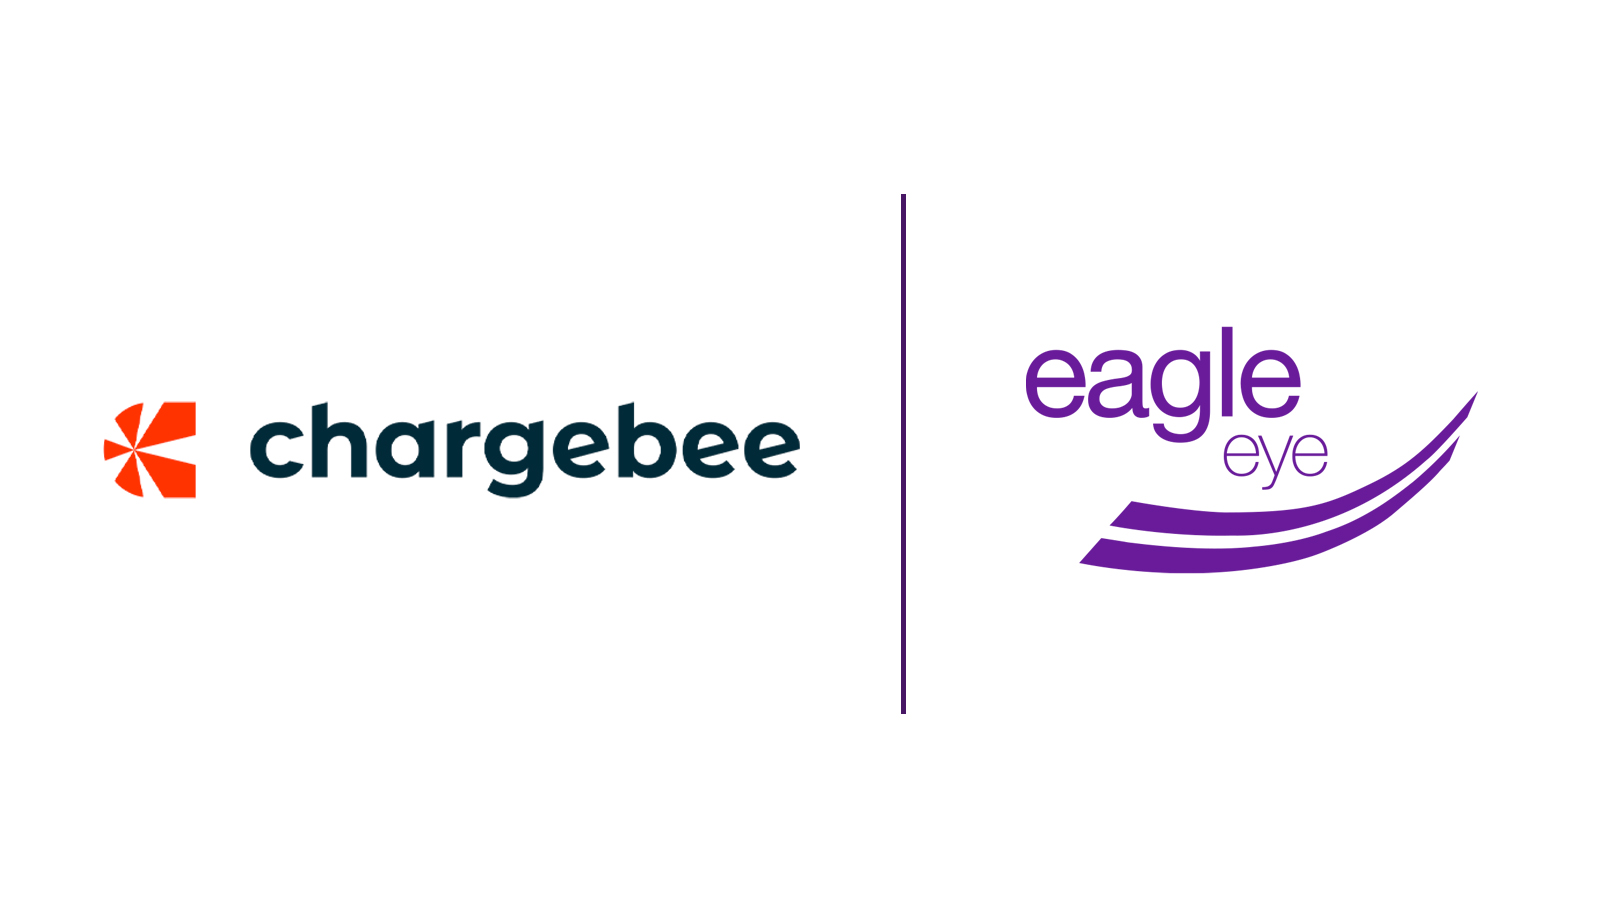 Eagle Eye and Chargebee Collaborate for Subscription Services, Aiding Retail and Hospitality Sectors